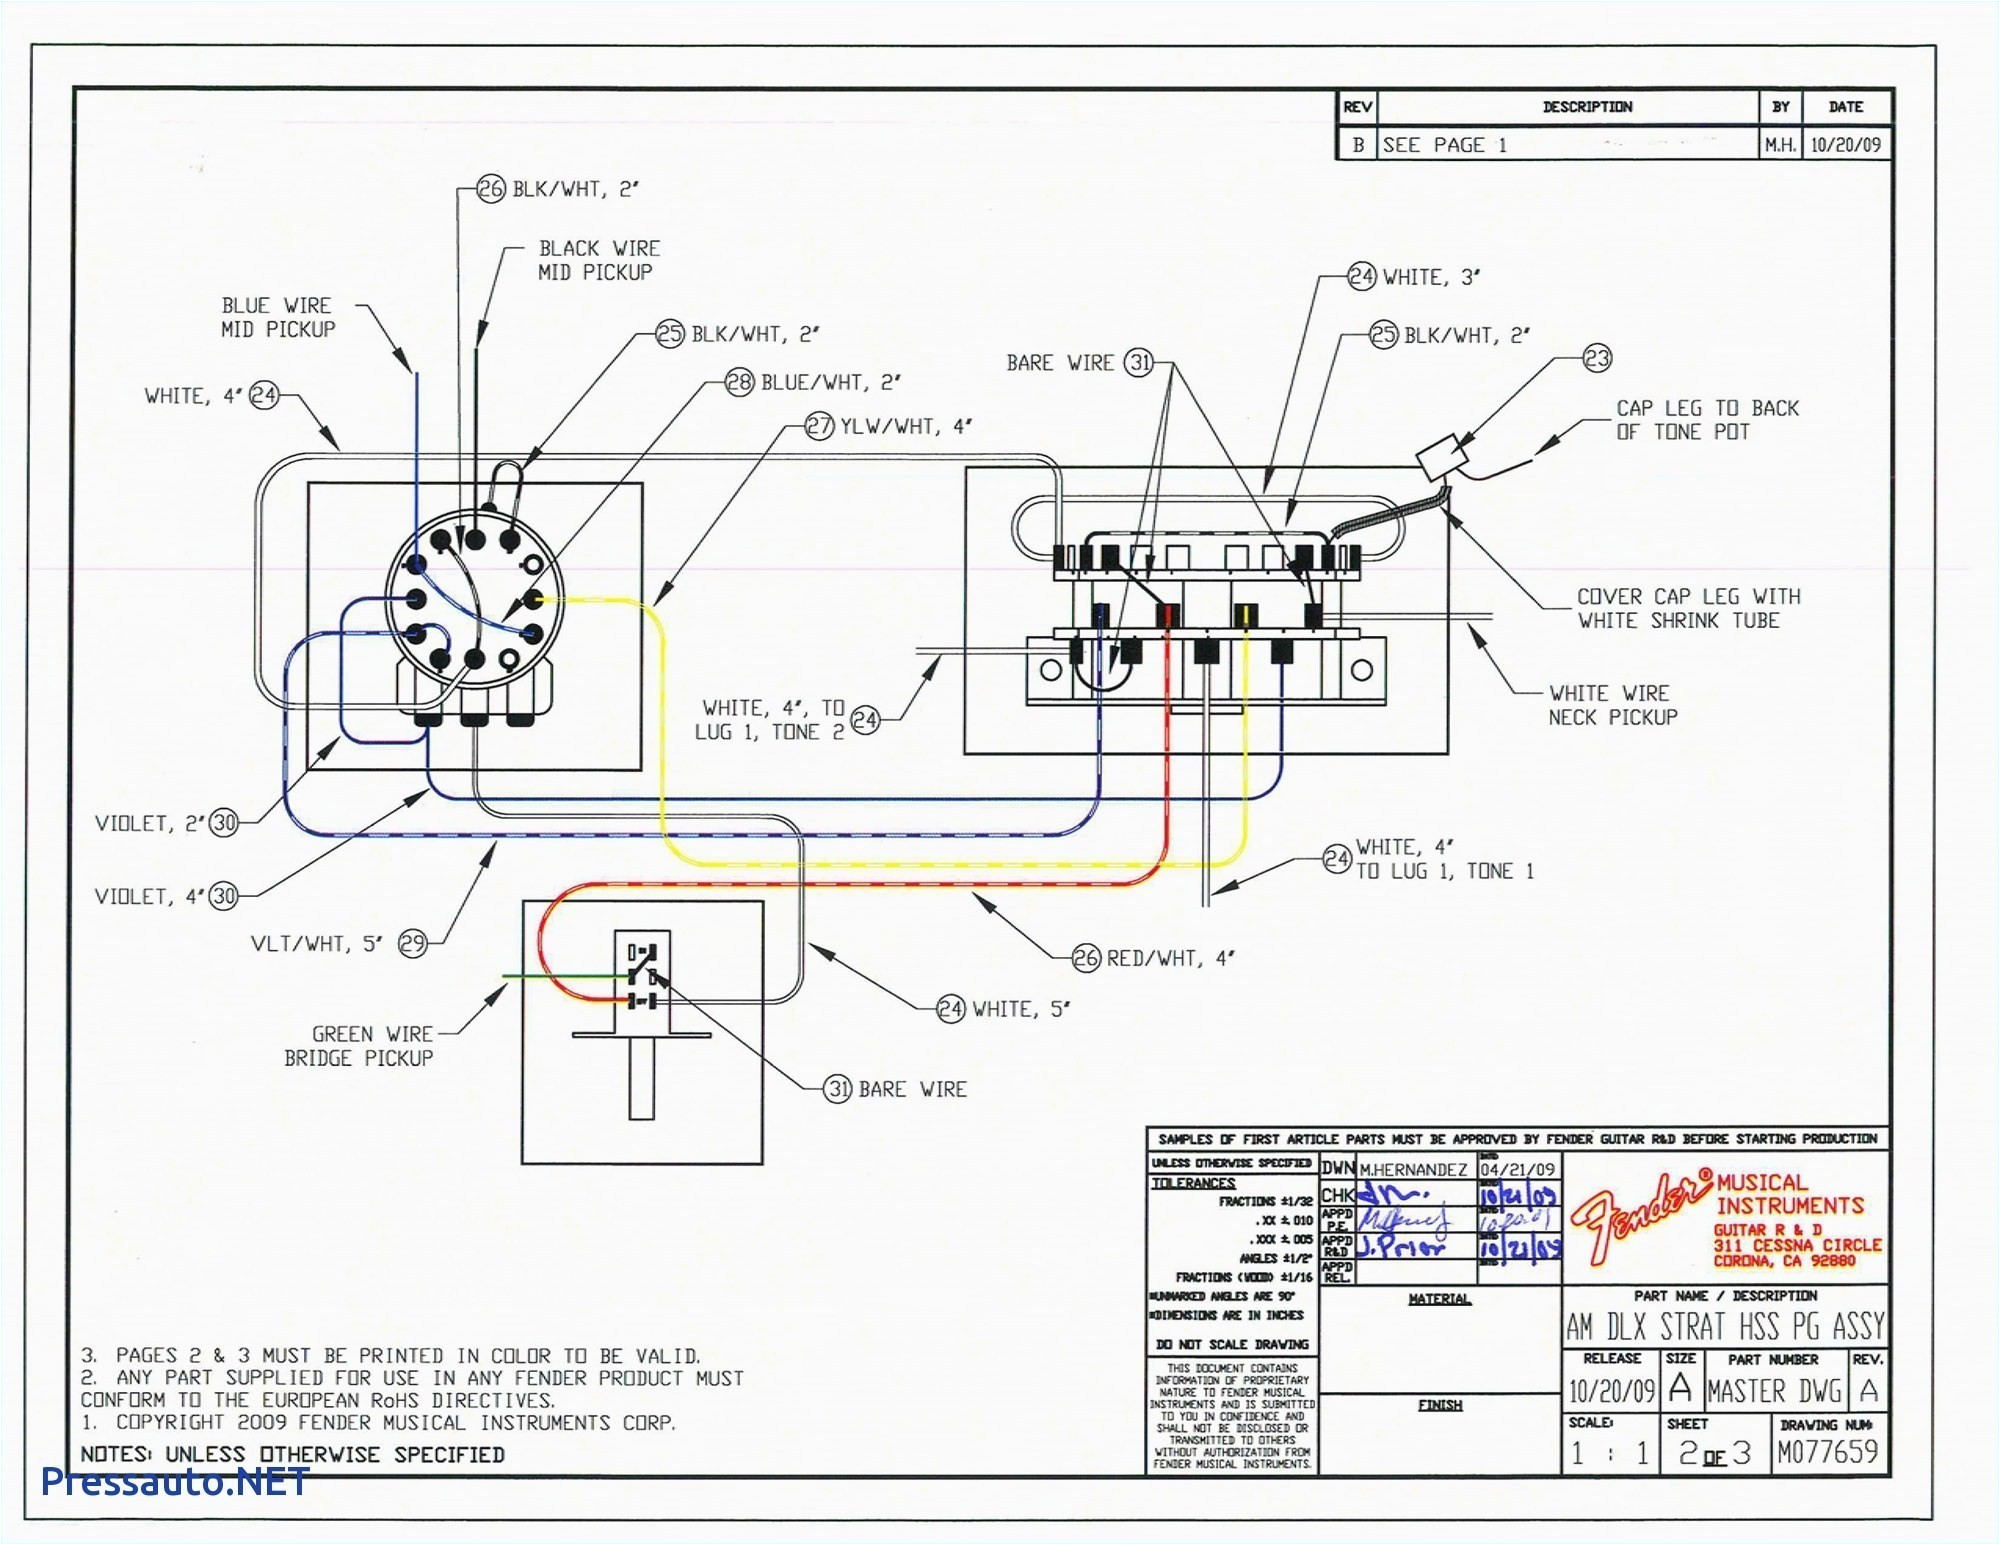 wiring diagram best 10 of stratocaster search wiring diagram wiring diagram best 10 of stratocaster